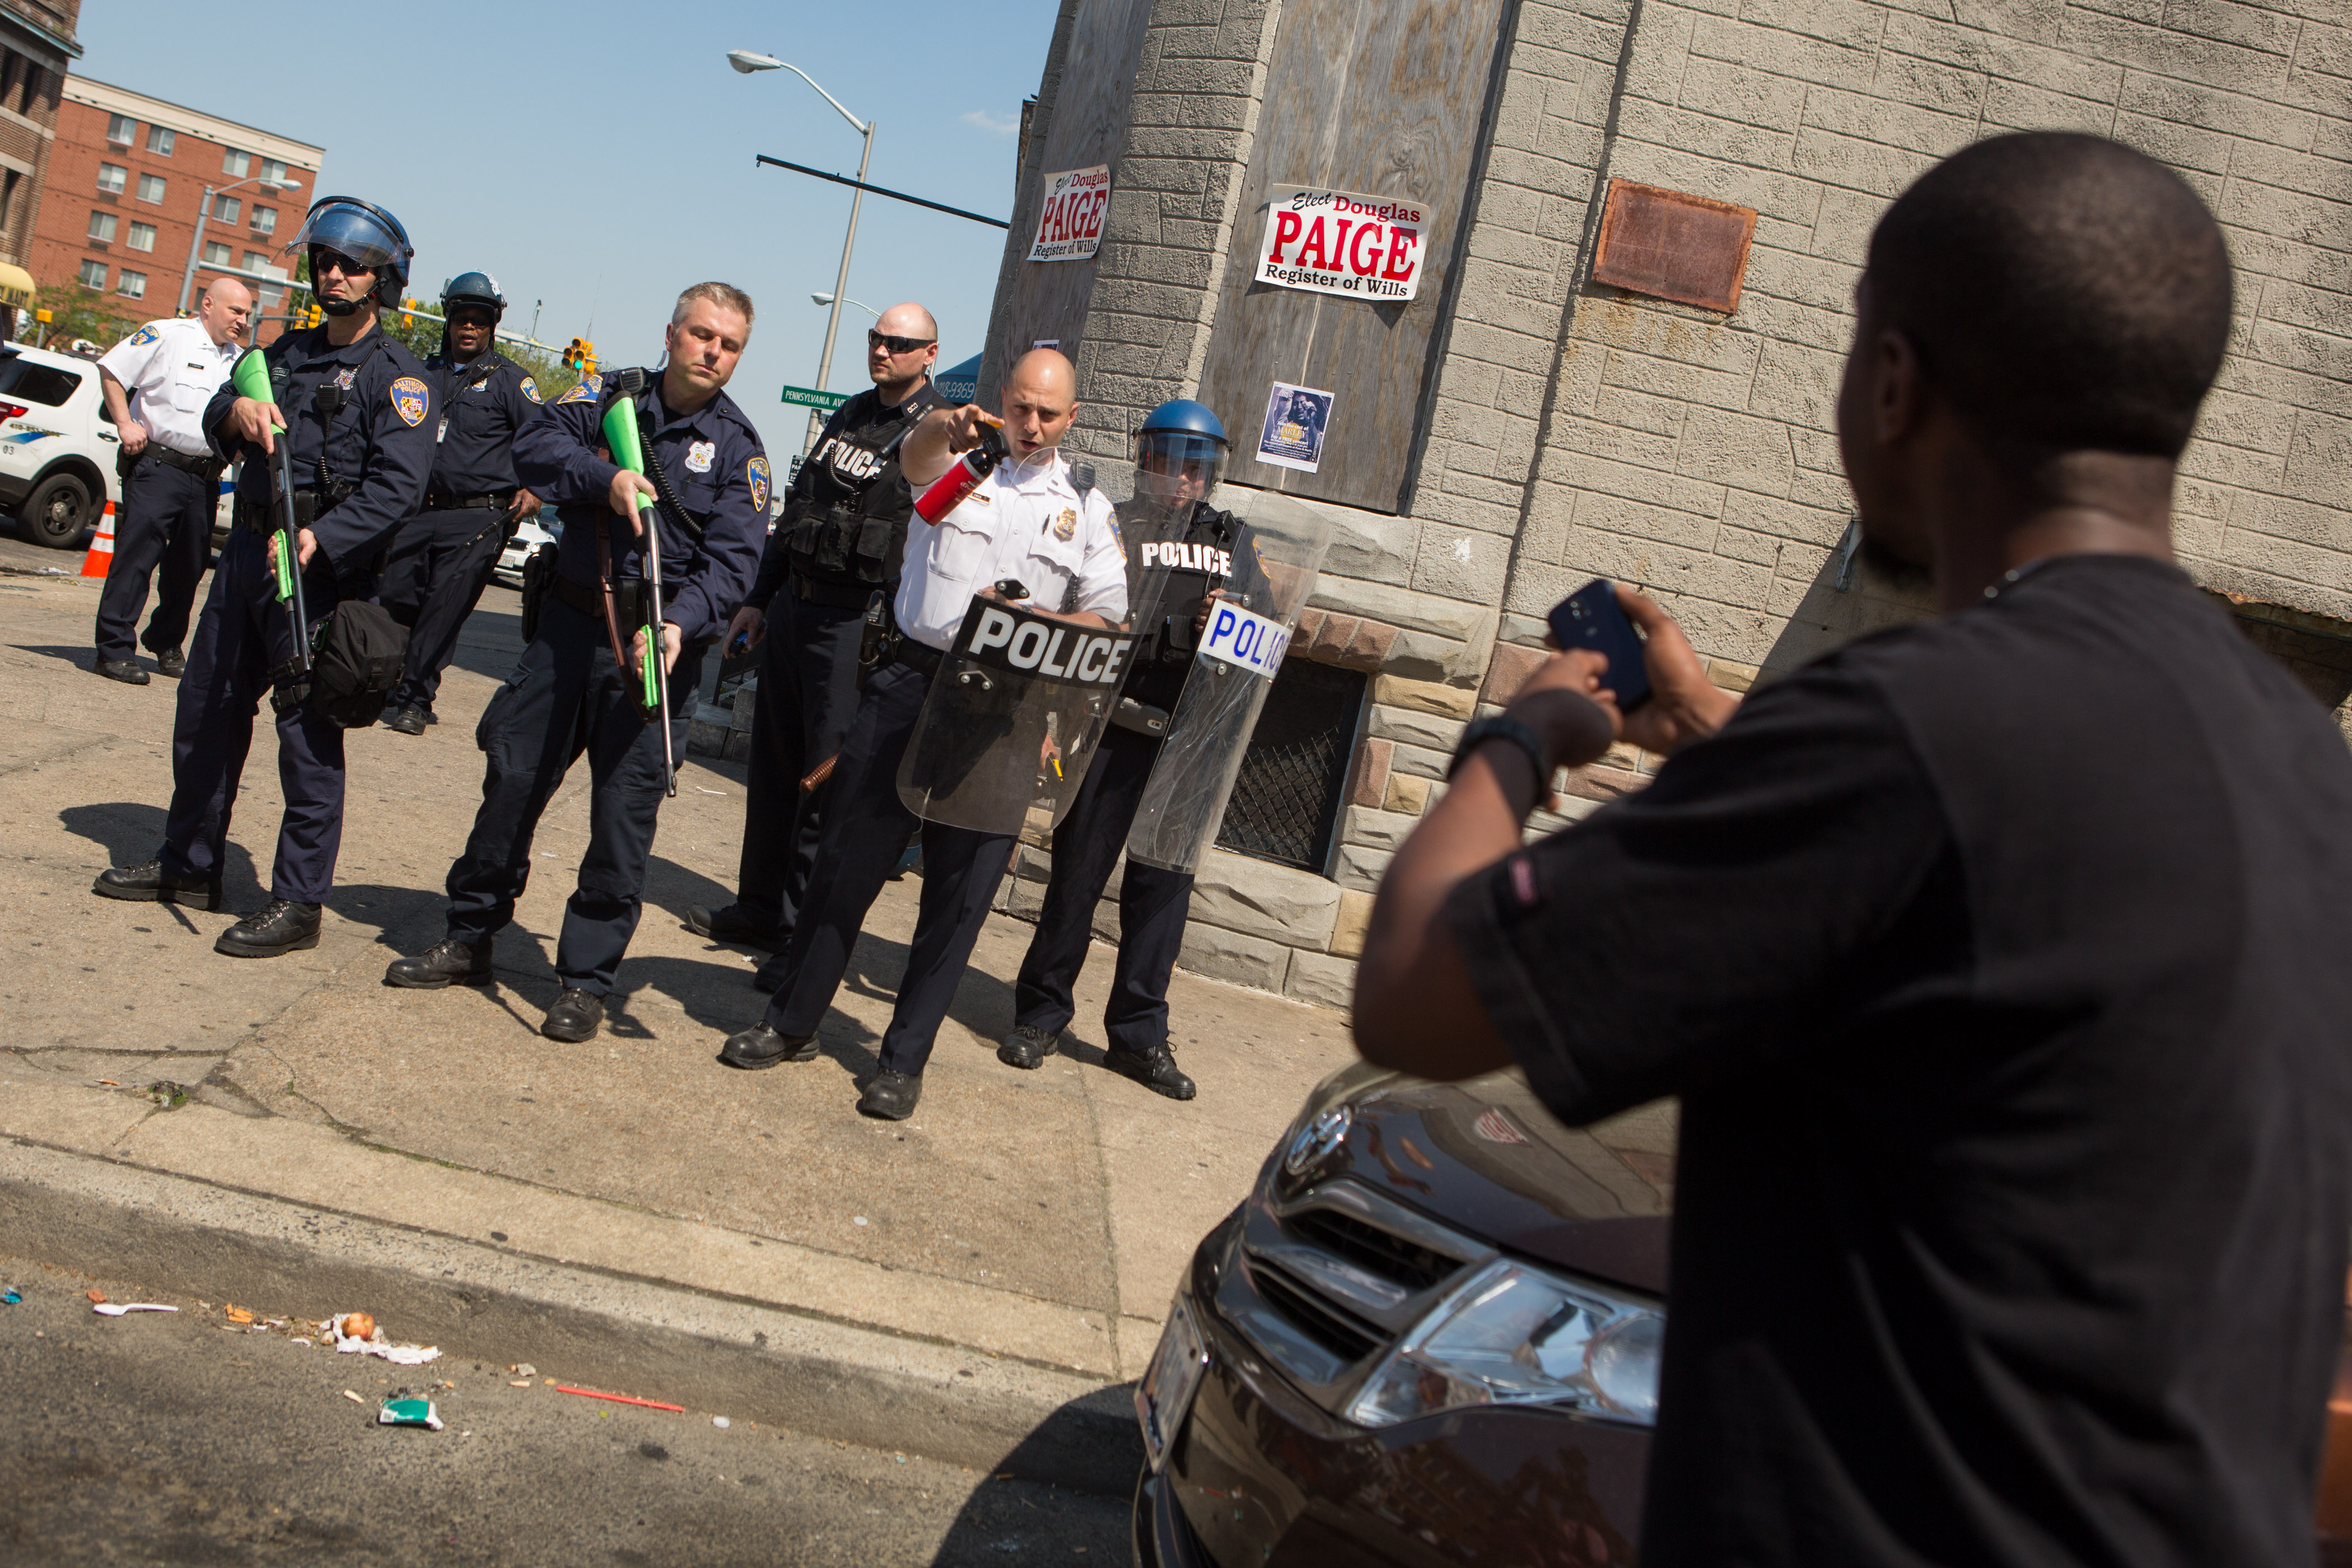 A man faces off with a line of police after a shot was fired during an arrest in Baltimore on North Avenue. (Getty)